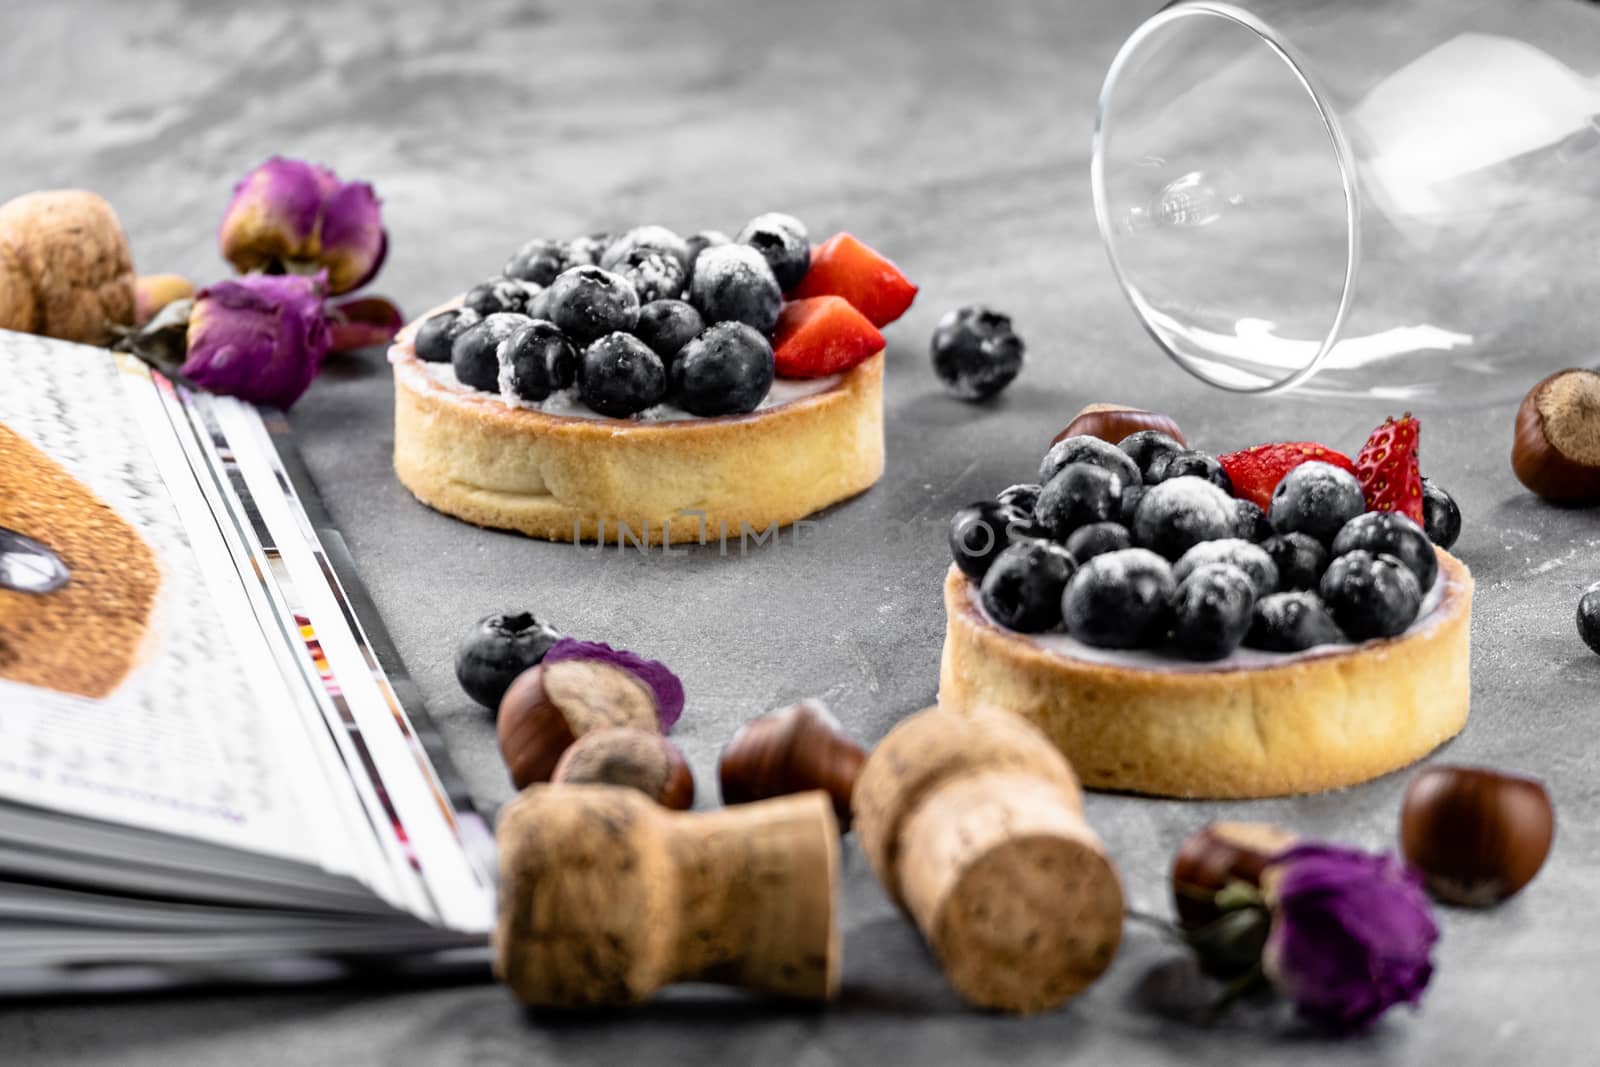 Blueberry and strawberry shortcake. There are hazelnuts, roses and wine corks on the table. Stone background. by rdv27